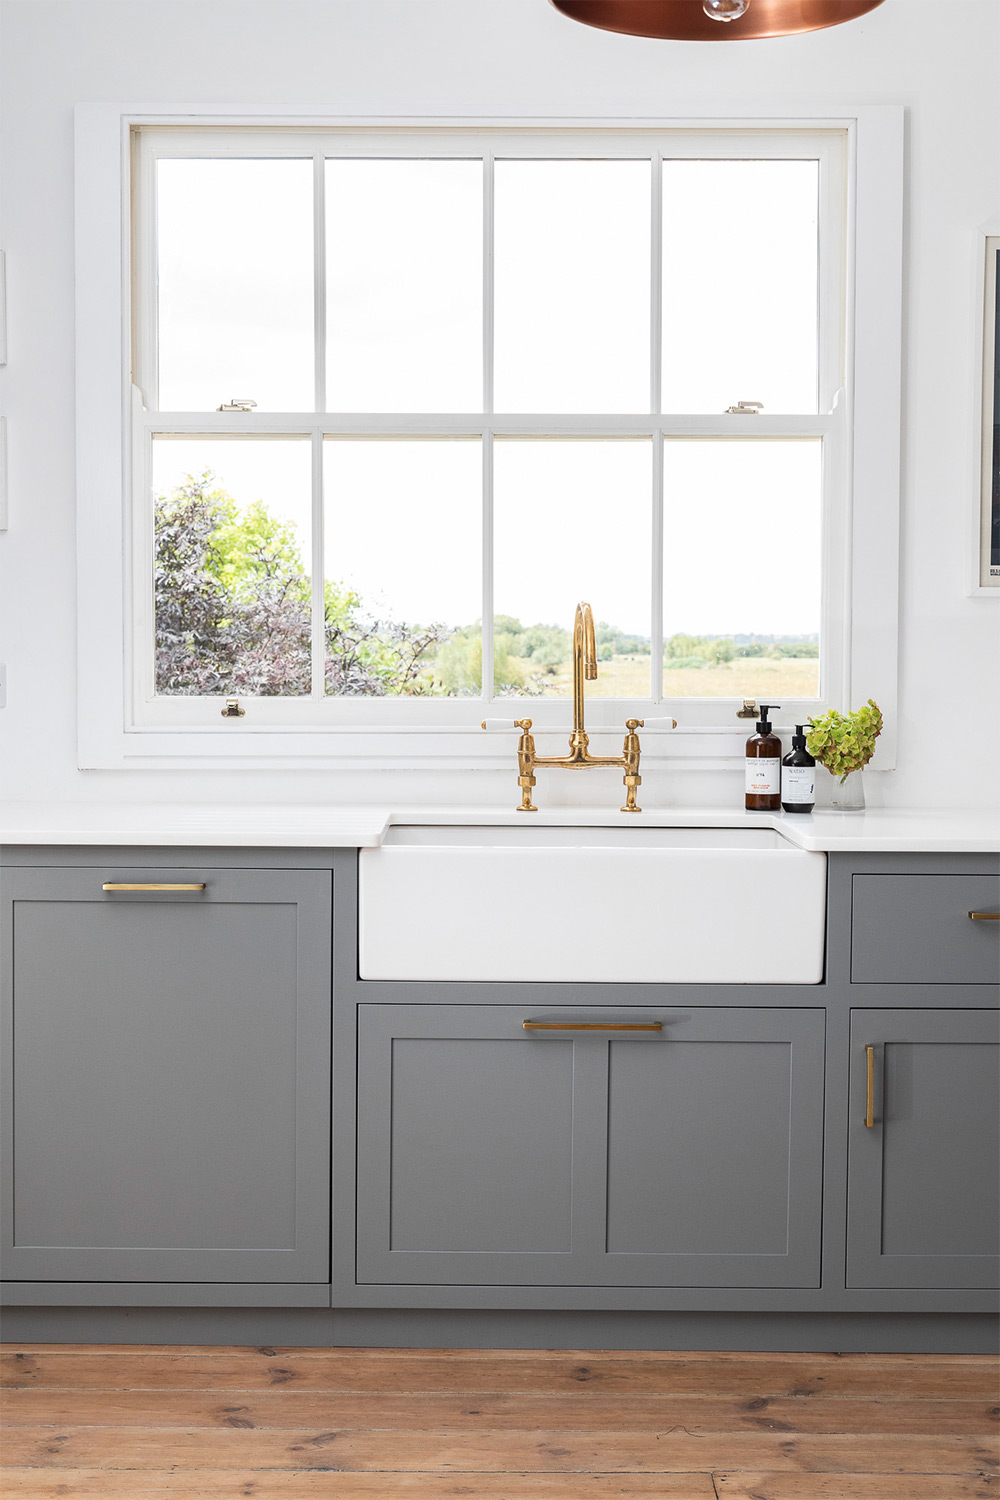 heartwood-cabinet-makers-grey-kitchen-somerset-02-large